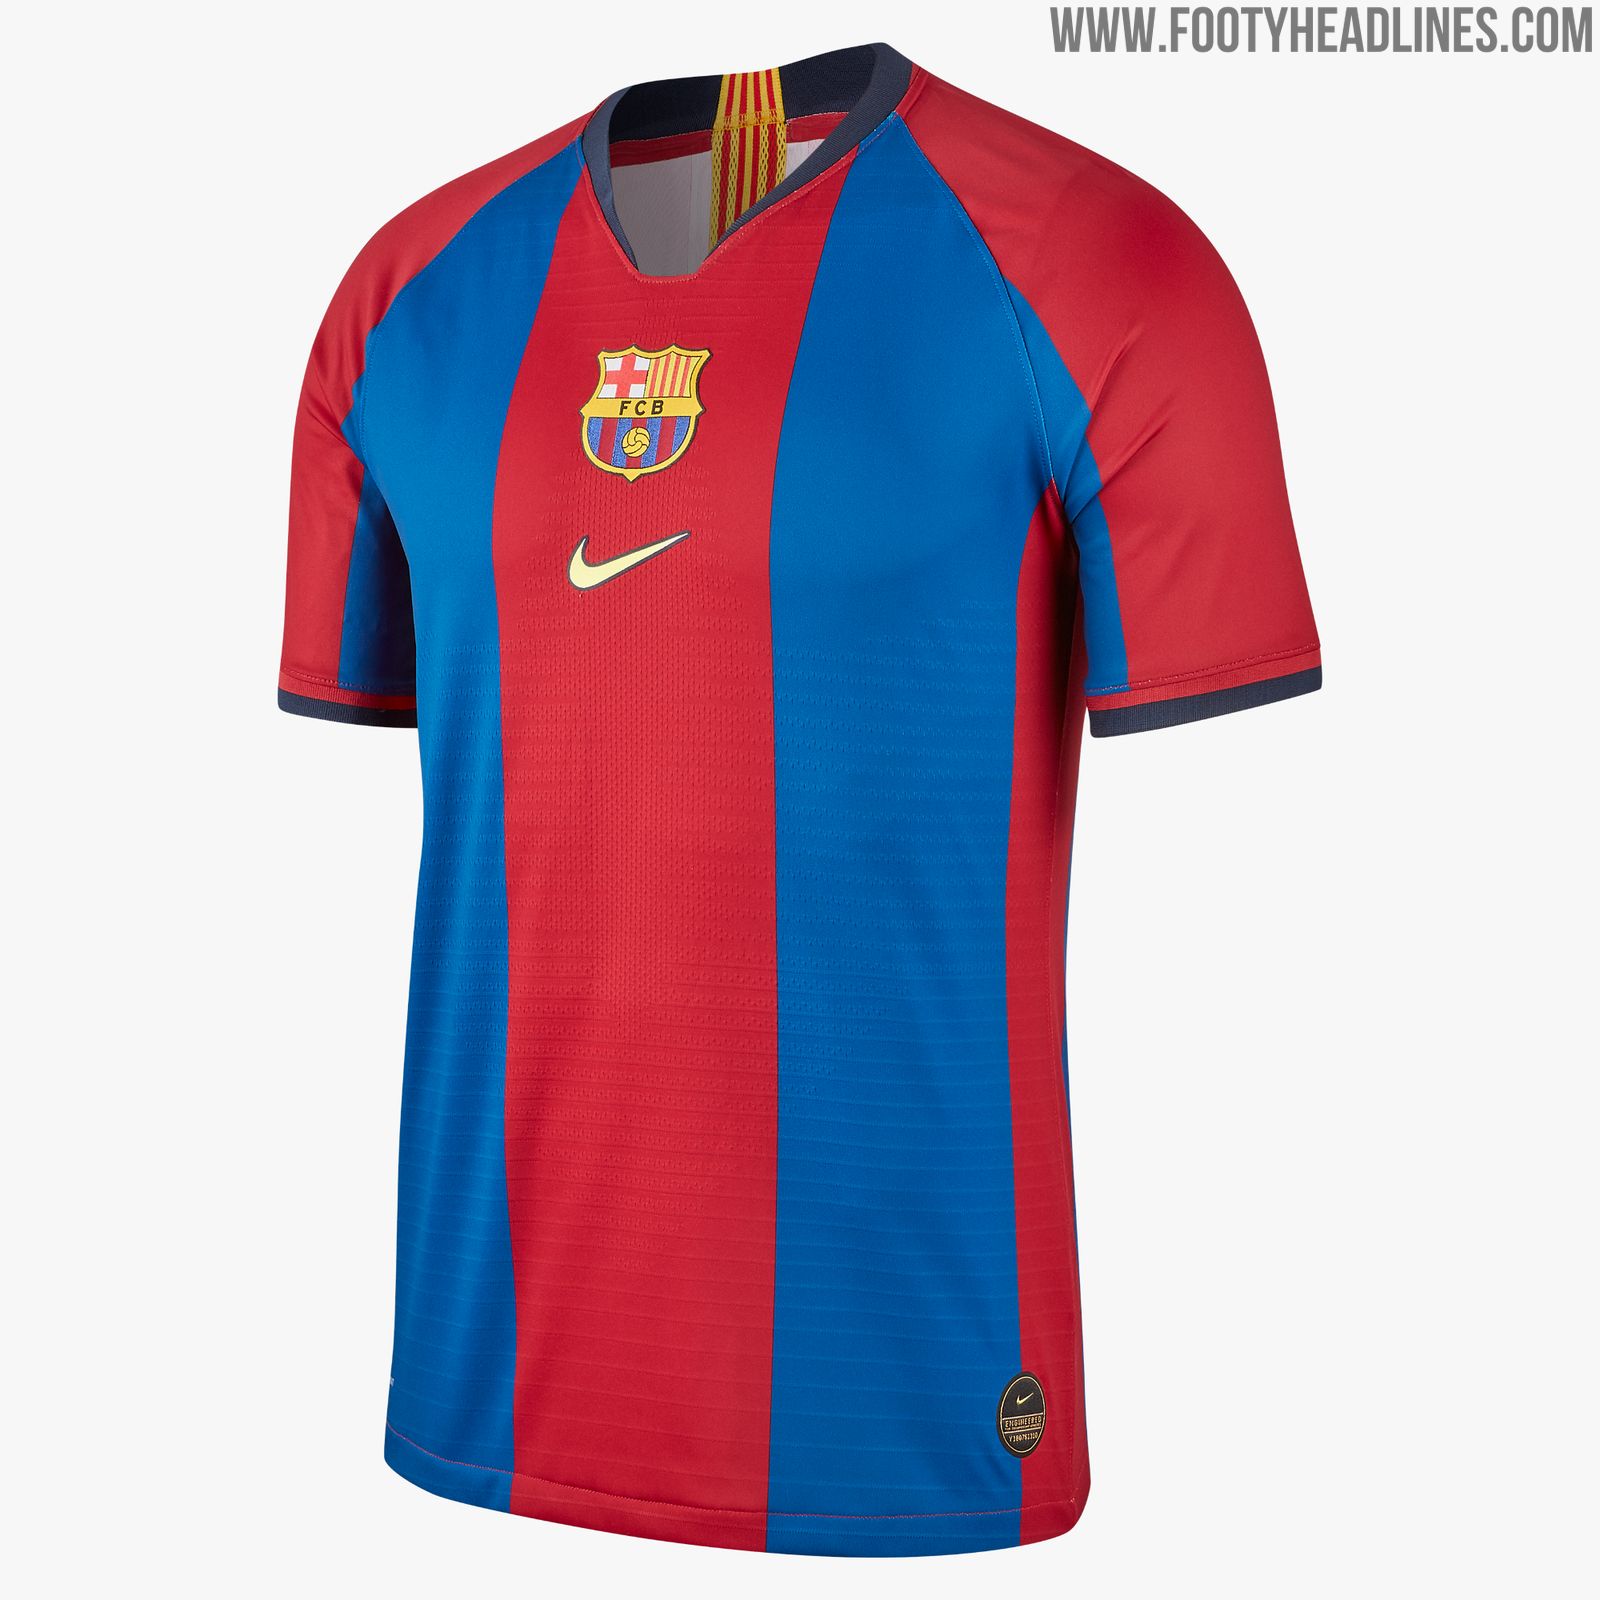 Pebish Opknappen getrouwd Special-Edition Nike FC Barcelona 1998-99 Remake Kit Released - Footy  Headlines